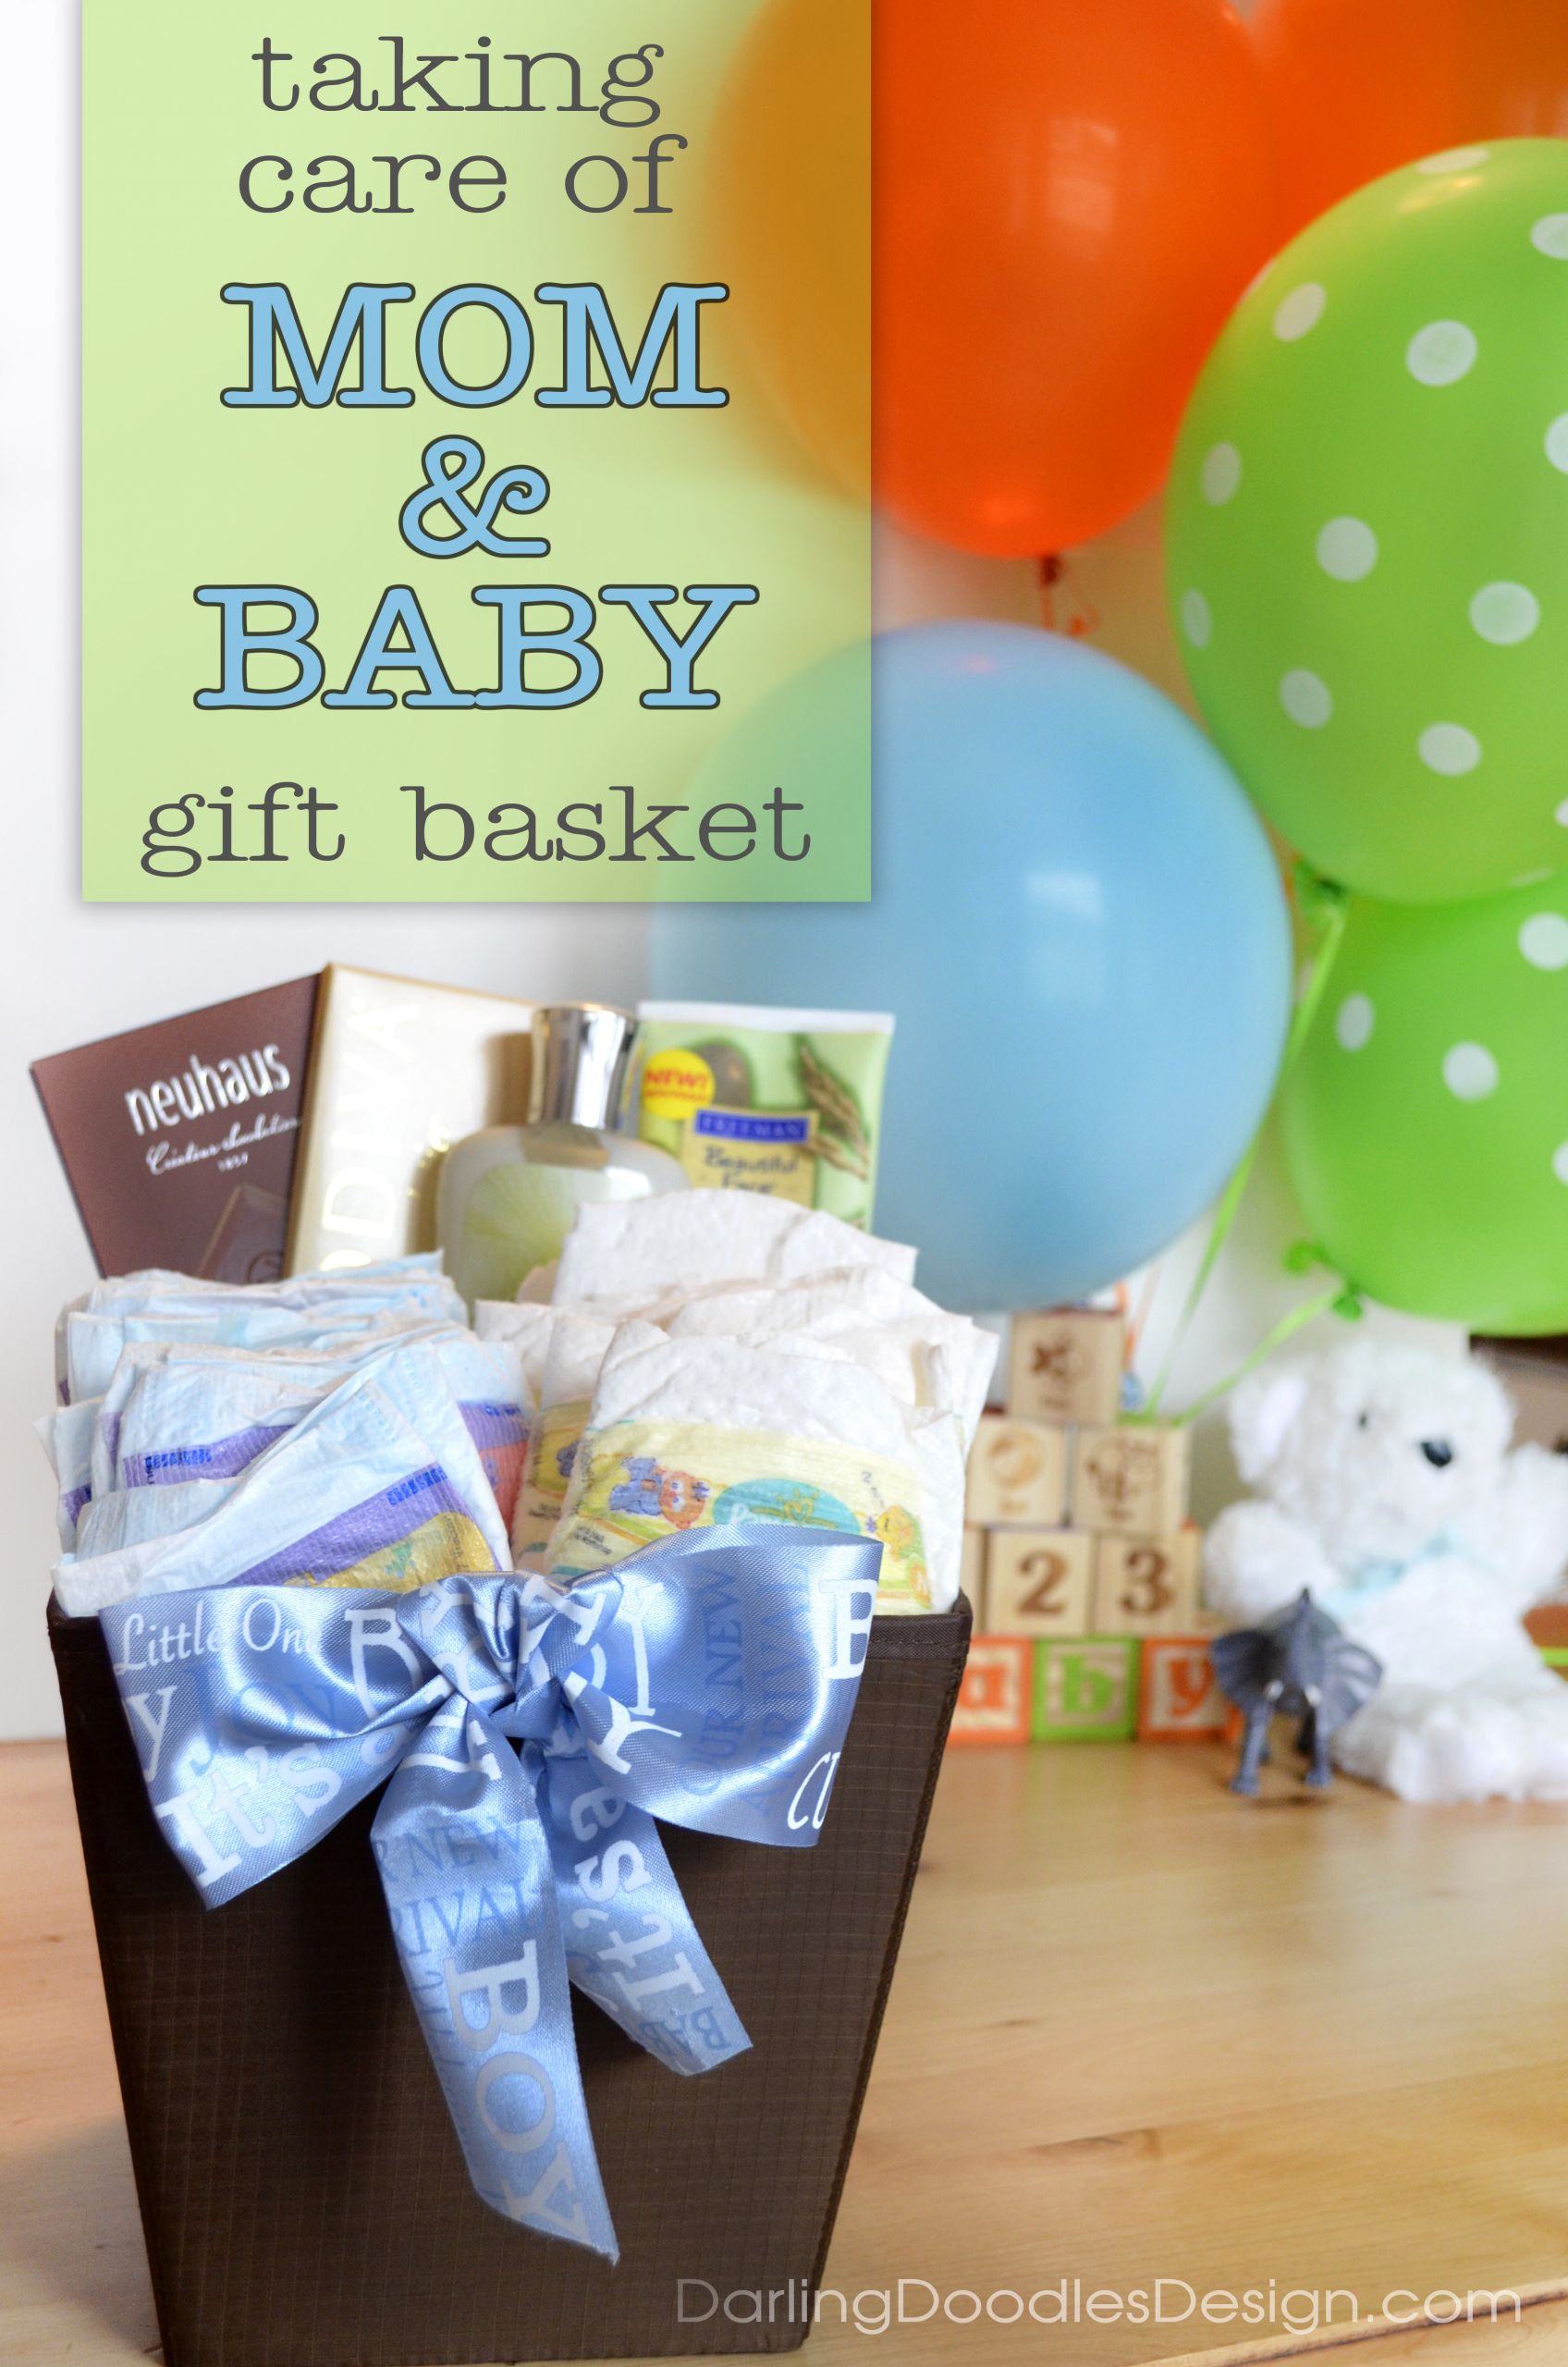 Baby Shower Gift Ideas For Mom And Dad
 A Baby Shower Gift for Mom & Baby Darling Doodles